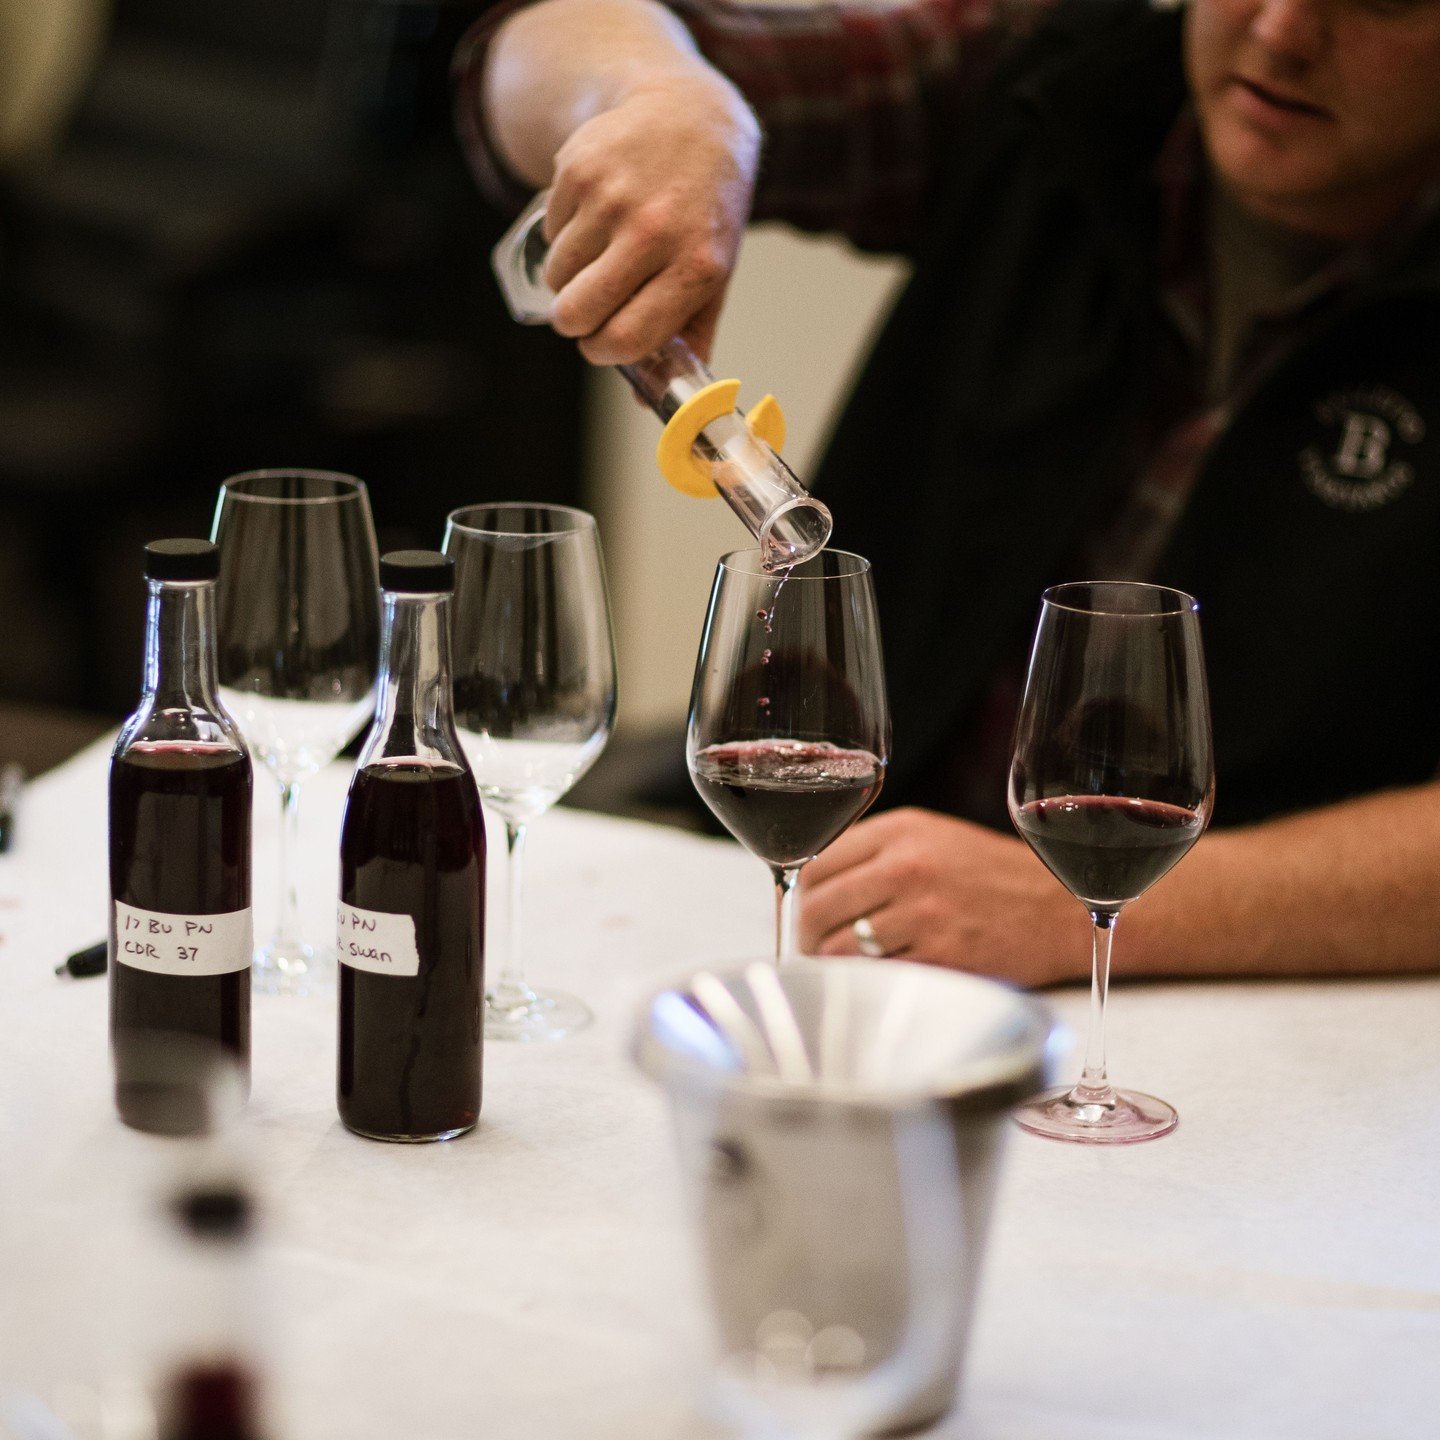 This Sunday BLENDING MASTERCLASS - RESERVE YOUR SPOT for a chance to blend your very own Cider Ridge wine - LINK IN OUR BIO 

Wine blending, an ancient art form in the world of winemaking, is as intricate and thought-provoking as a canvas ready for a